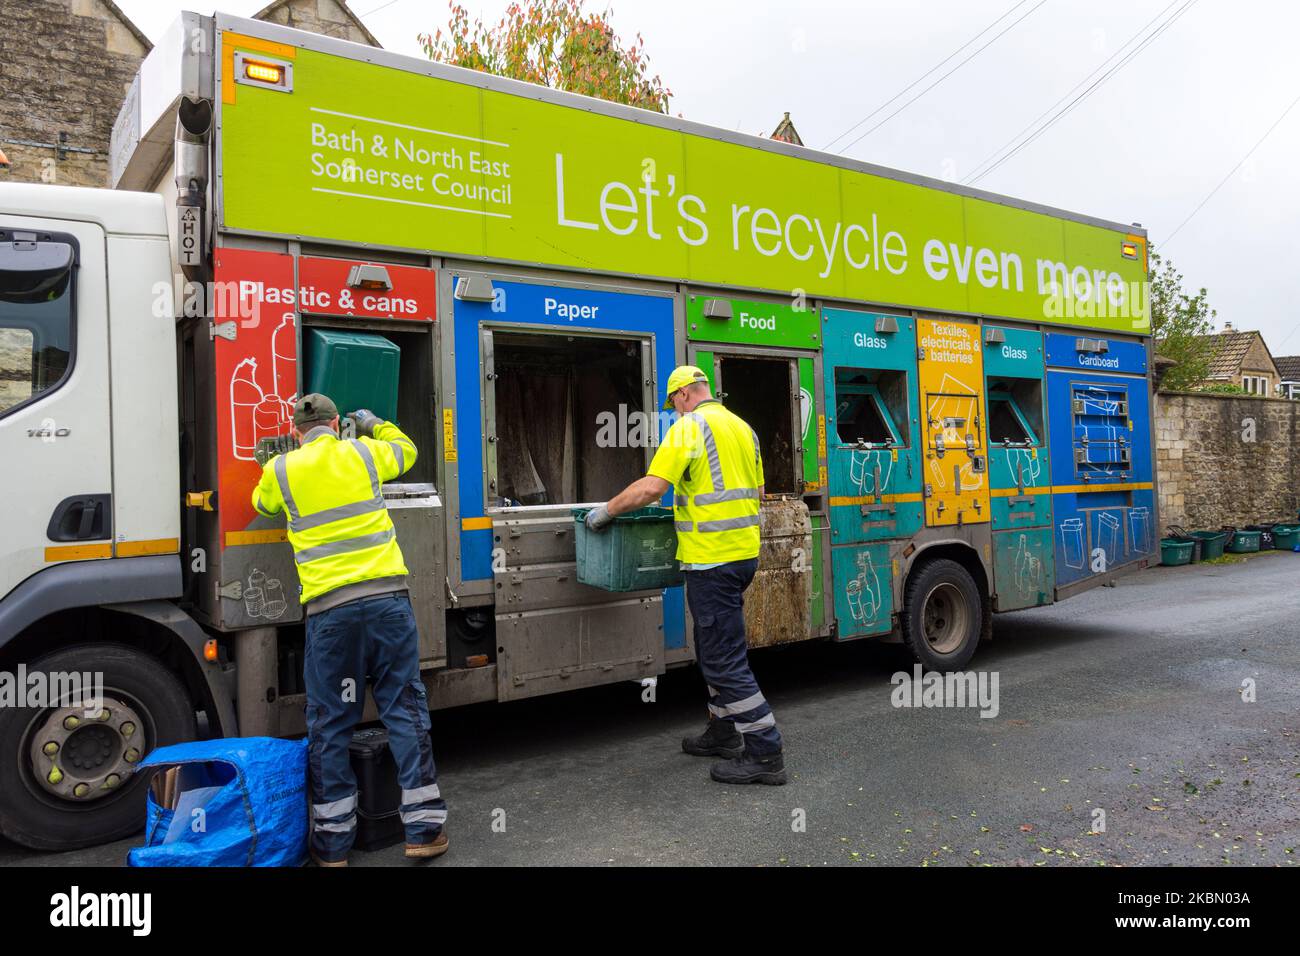 Council workers collect recycling refuse on a specially designed truck in Batheaston, Somerset, England, UK Stock Photo